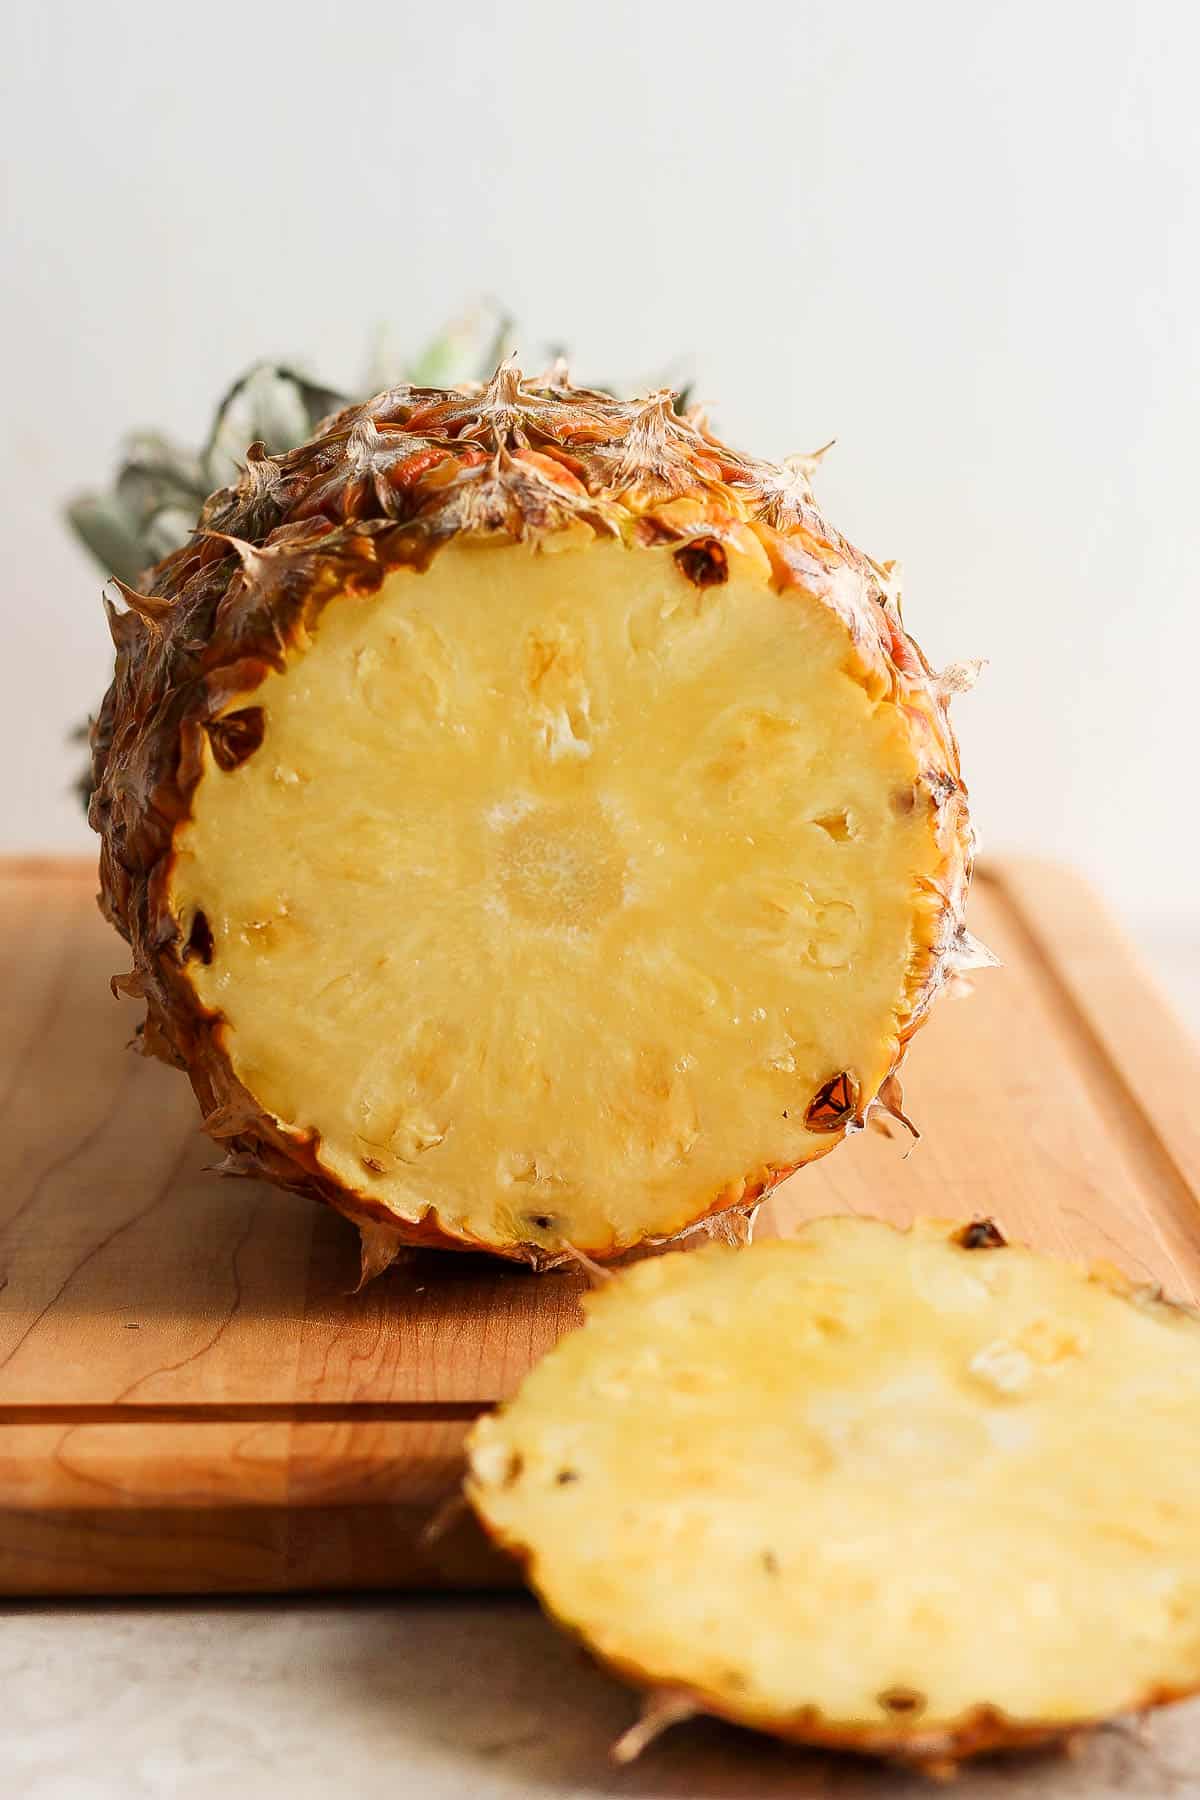 A pineapple on it's side on a wooden cutting board with the end cut off.